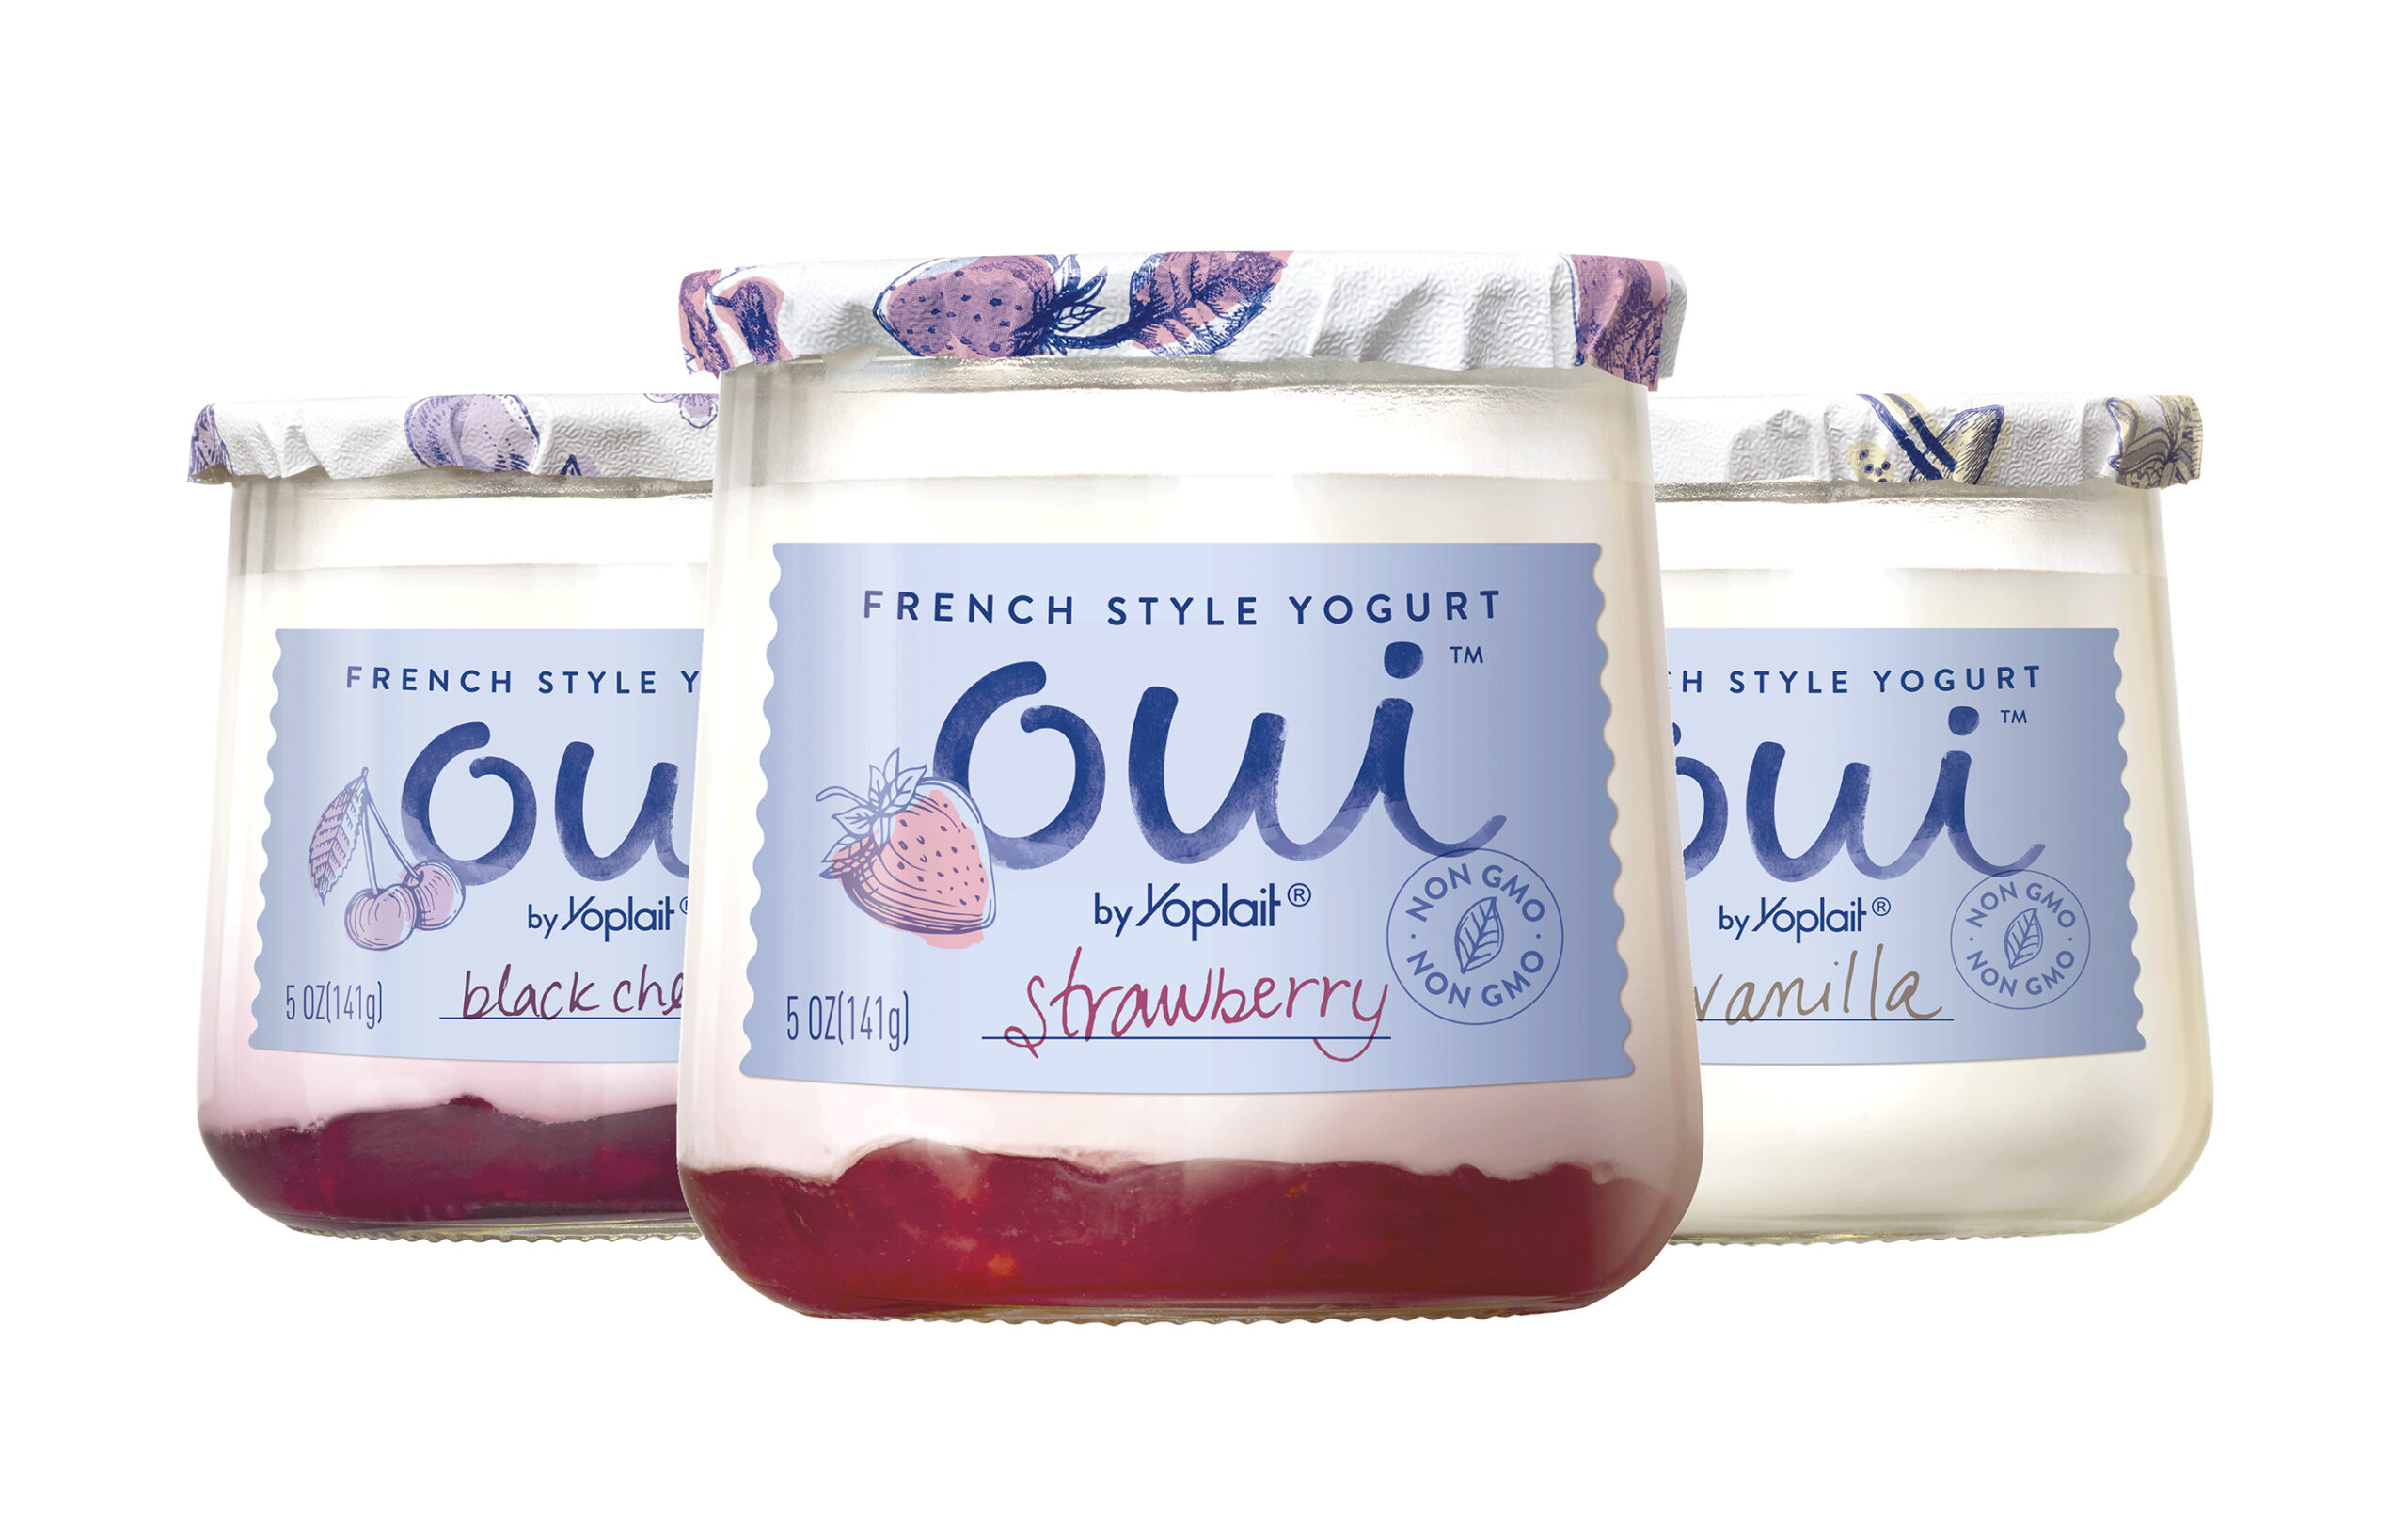 Yogurt launches, Kroger's readiness for competition and Burger King's triumph